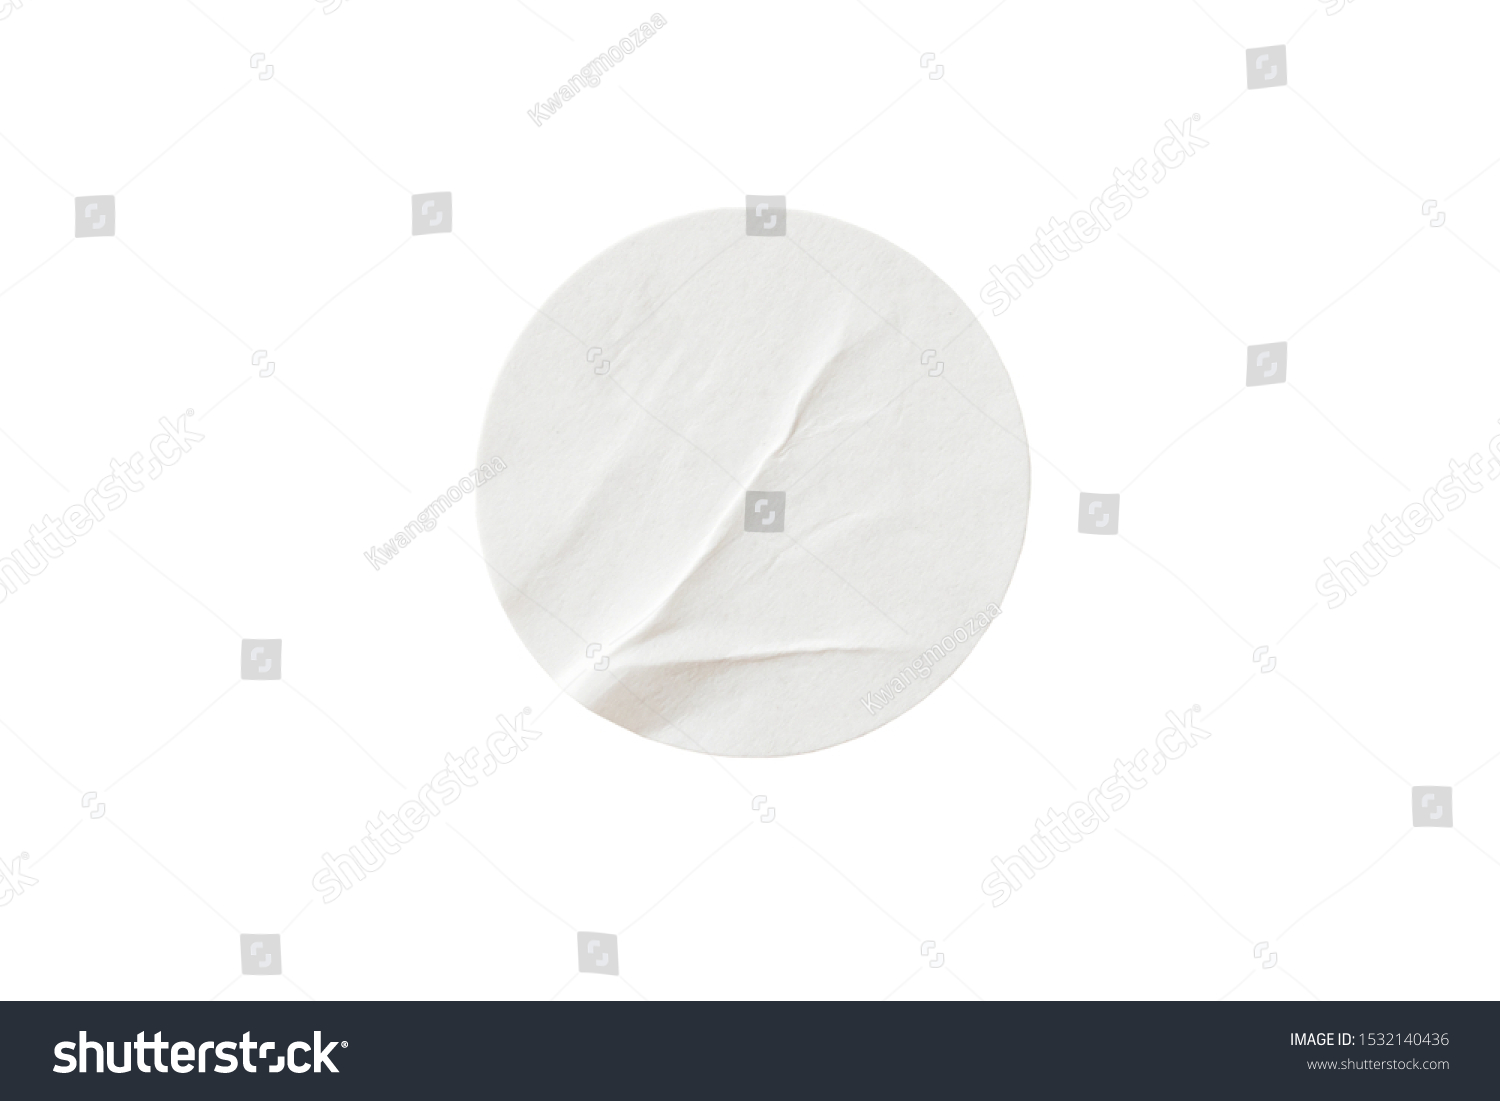 Blank white round paper sticker label isolated on white background with clipping path #1532140436